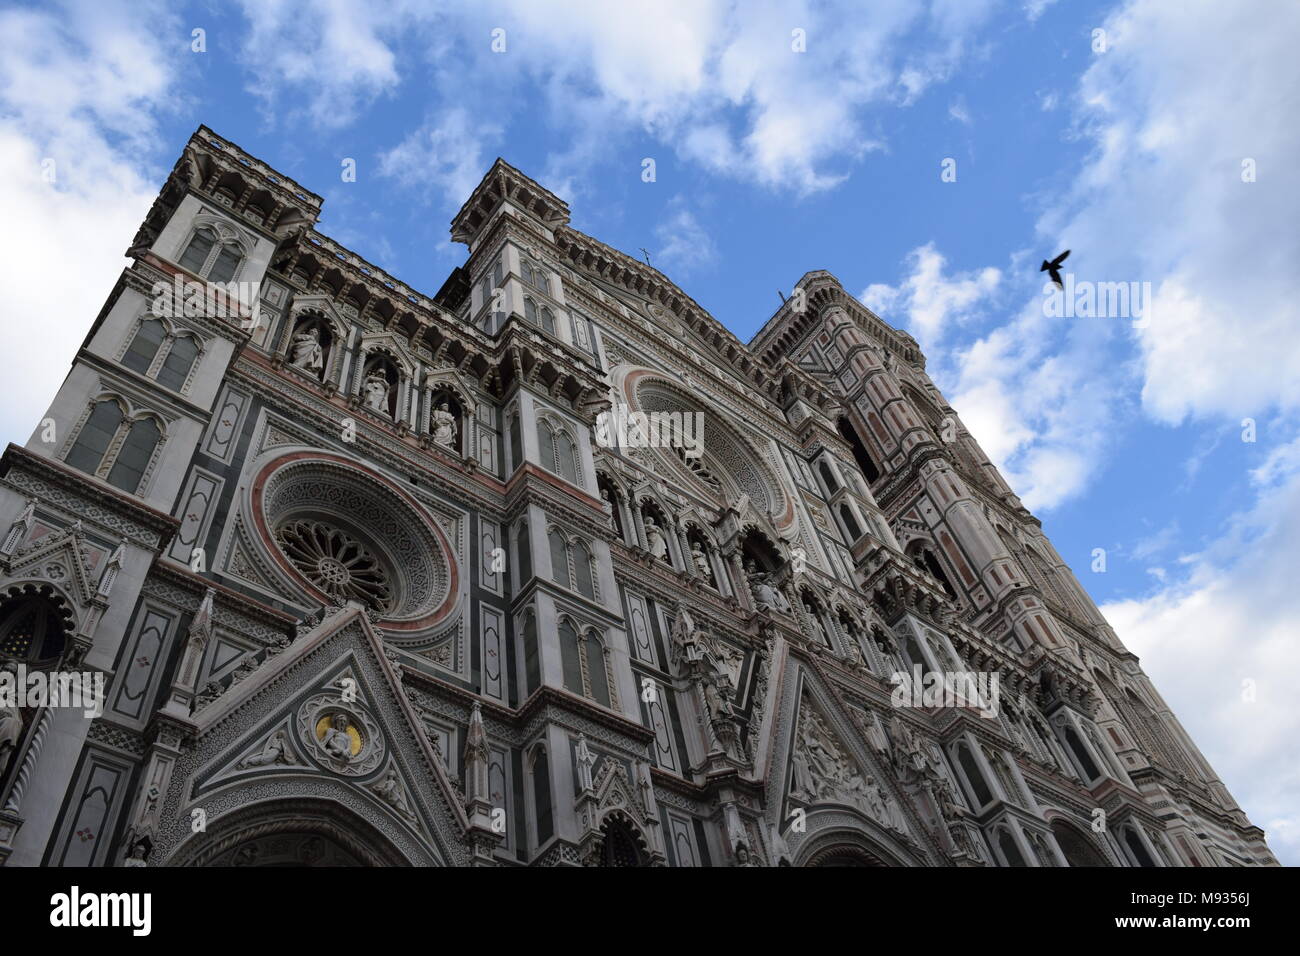 The Cattedrale di Santa Maria del Fiore is the main church of Florence, Italy. Stock Photo